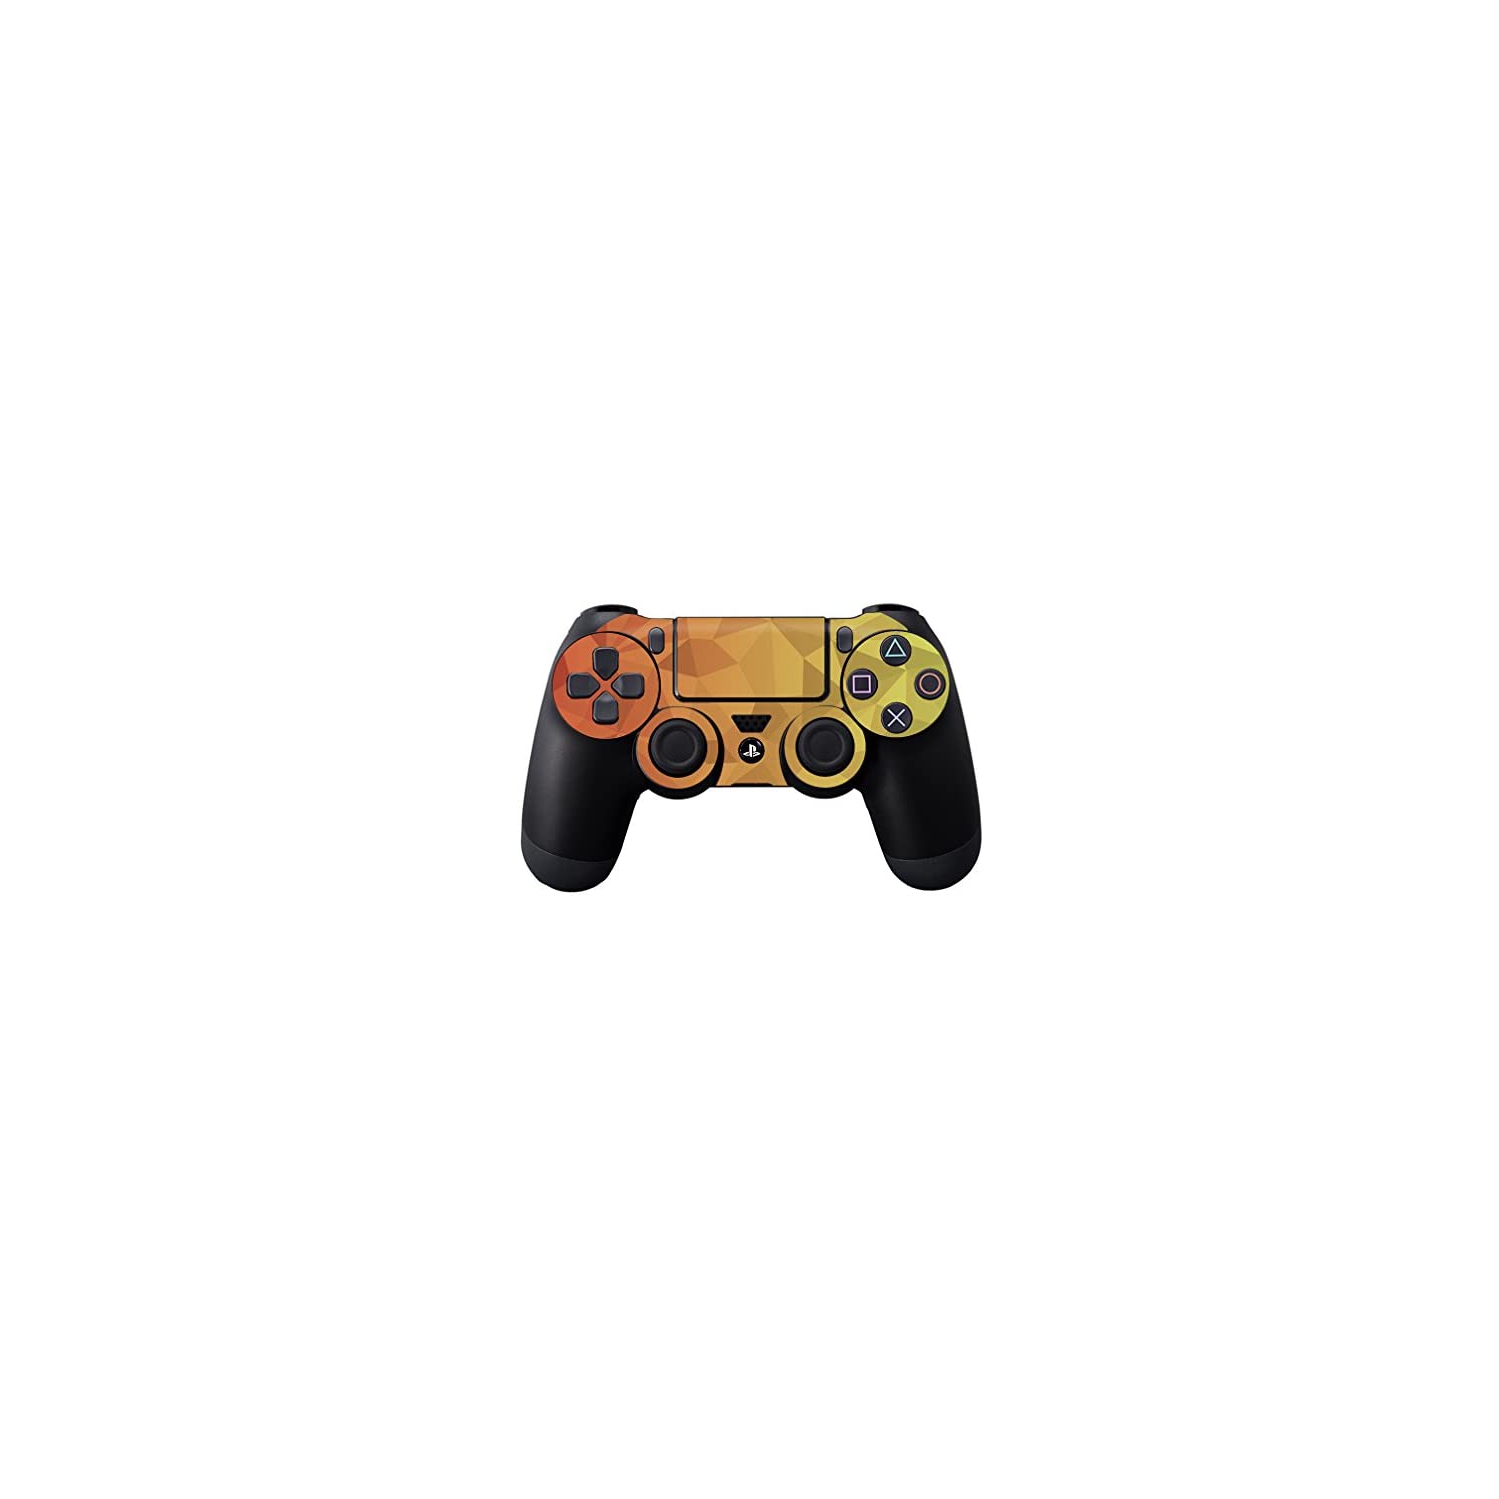 MightySkins Skin Compatible With Sony PlayStation DualShock PS4 Controller Case wrap cover sticker skins Red Orange Polygon